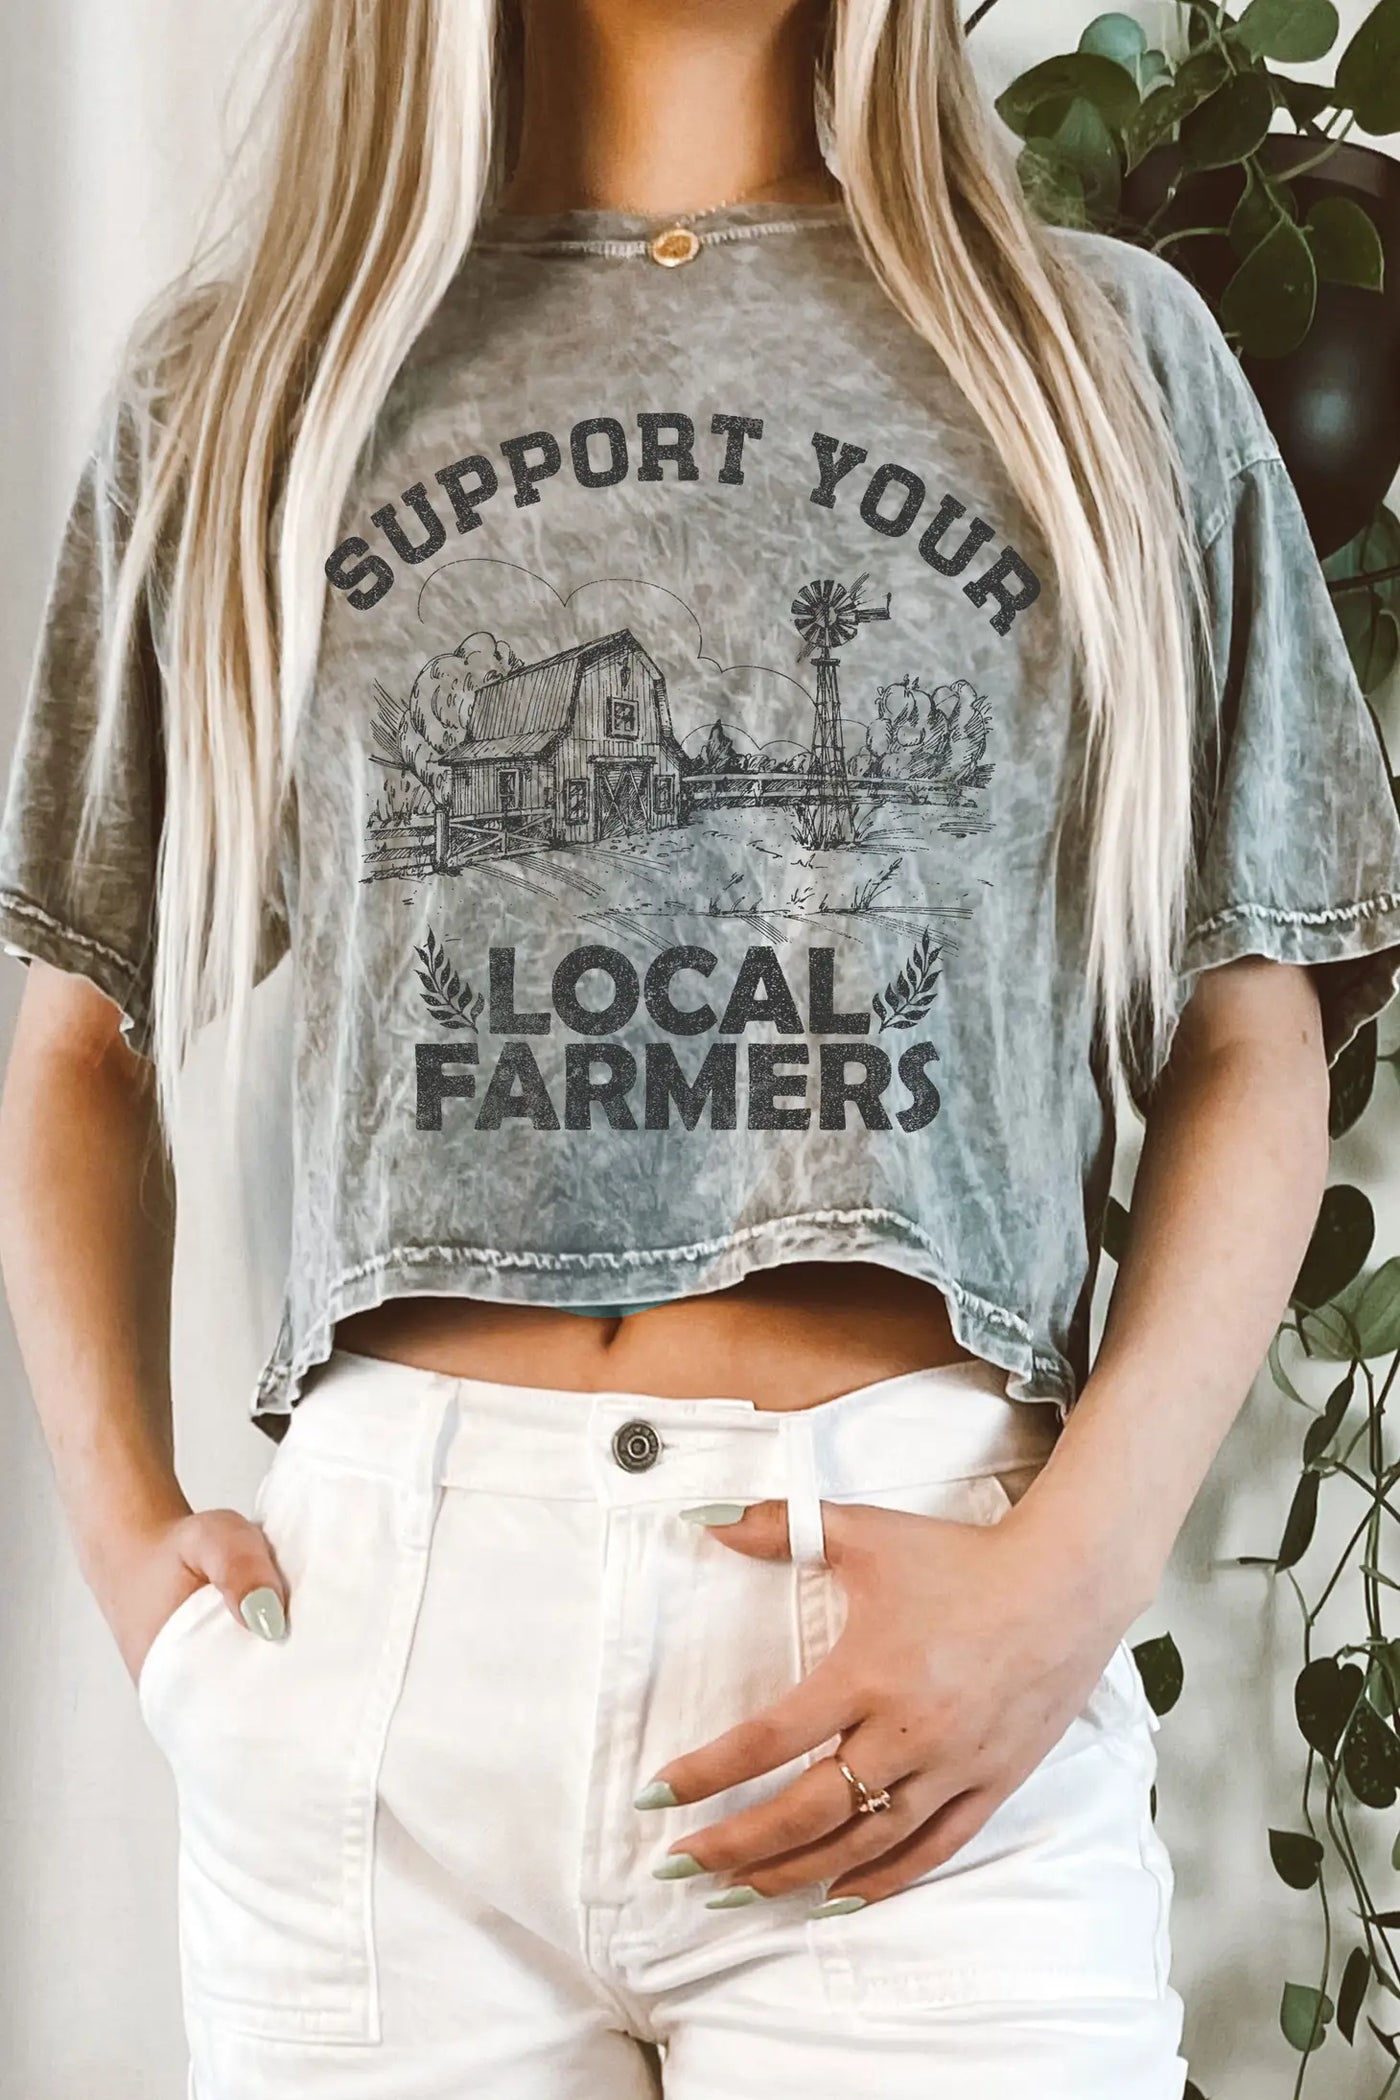 Support Your Local Farmers Long Crop Tee